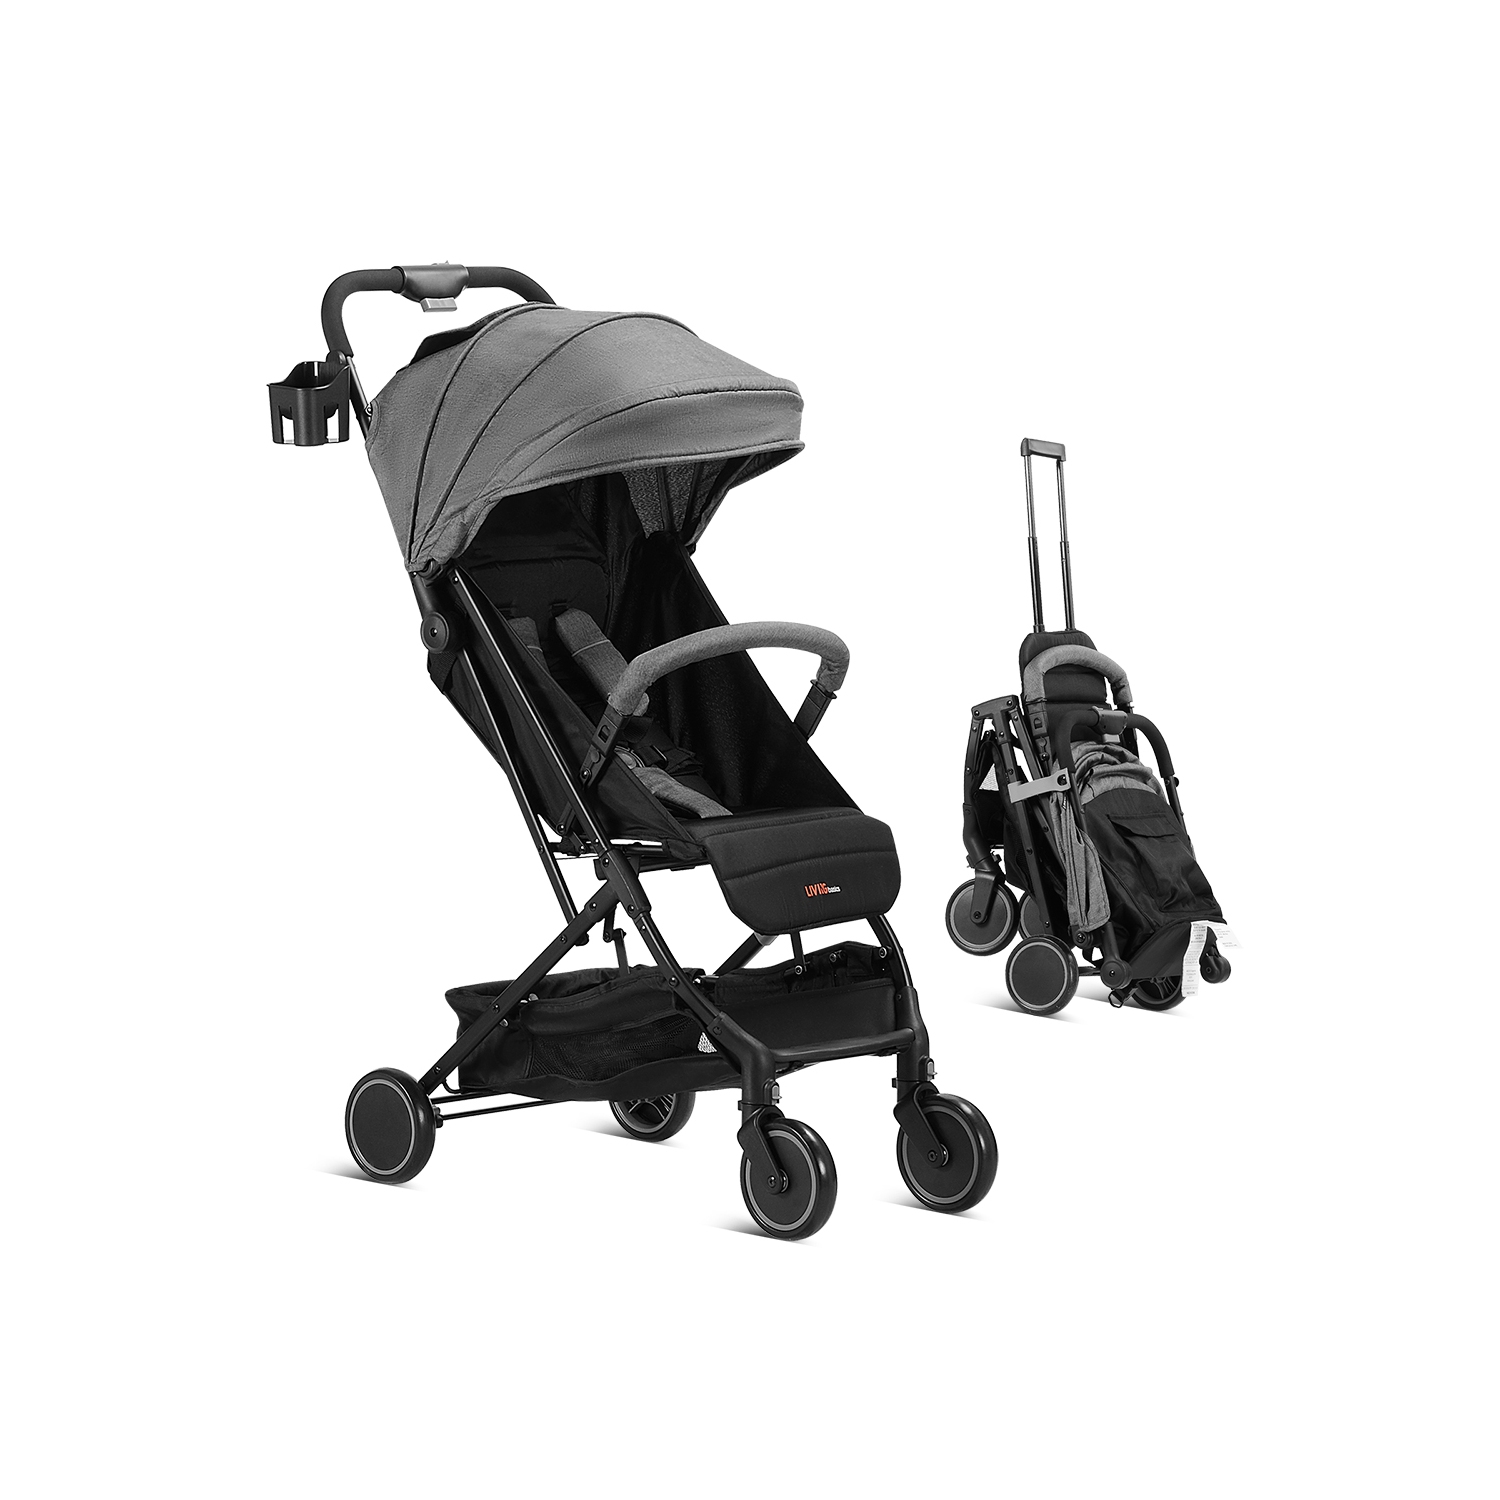 2 in 1 Foldable Baby Stroller, Compact Travel Stroller Baby Carriage with Storage Basket & Adjustable Canopy